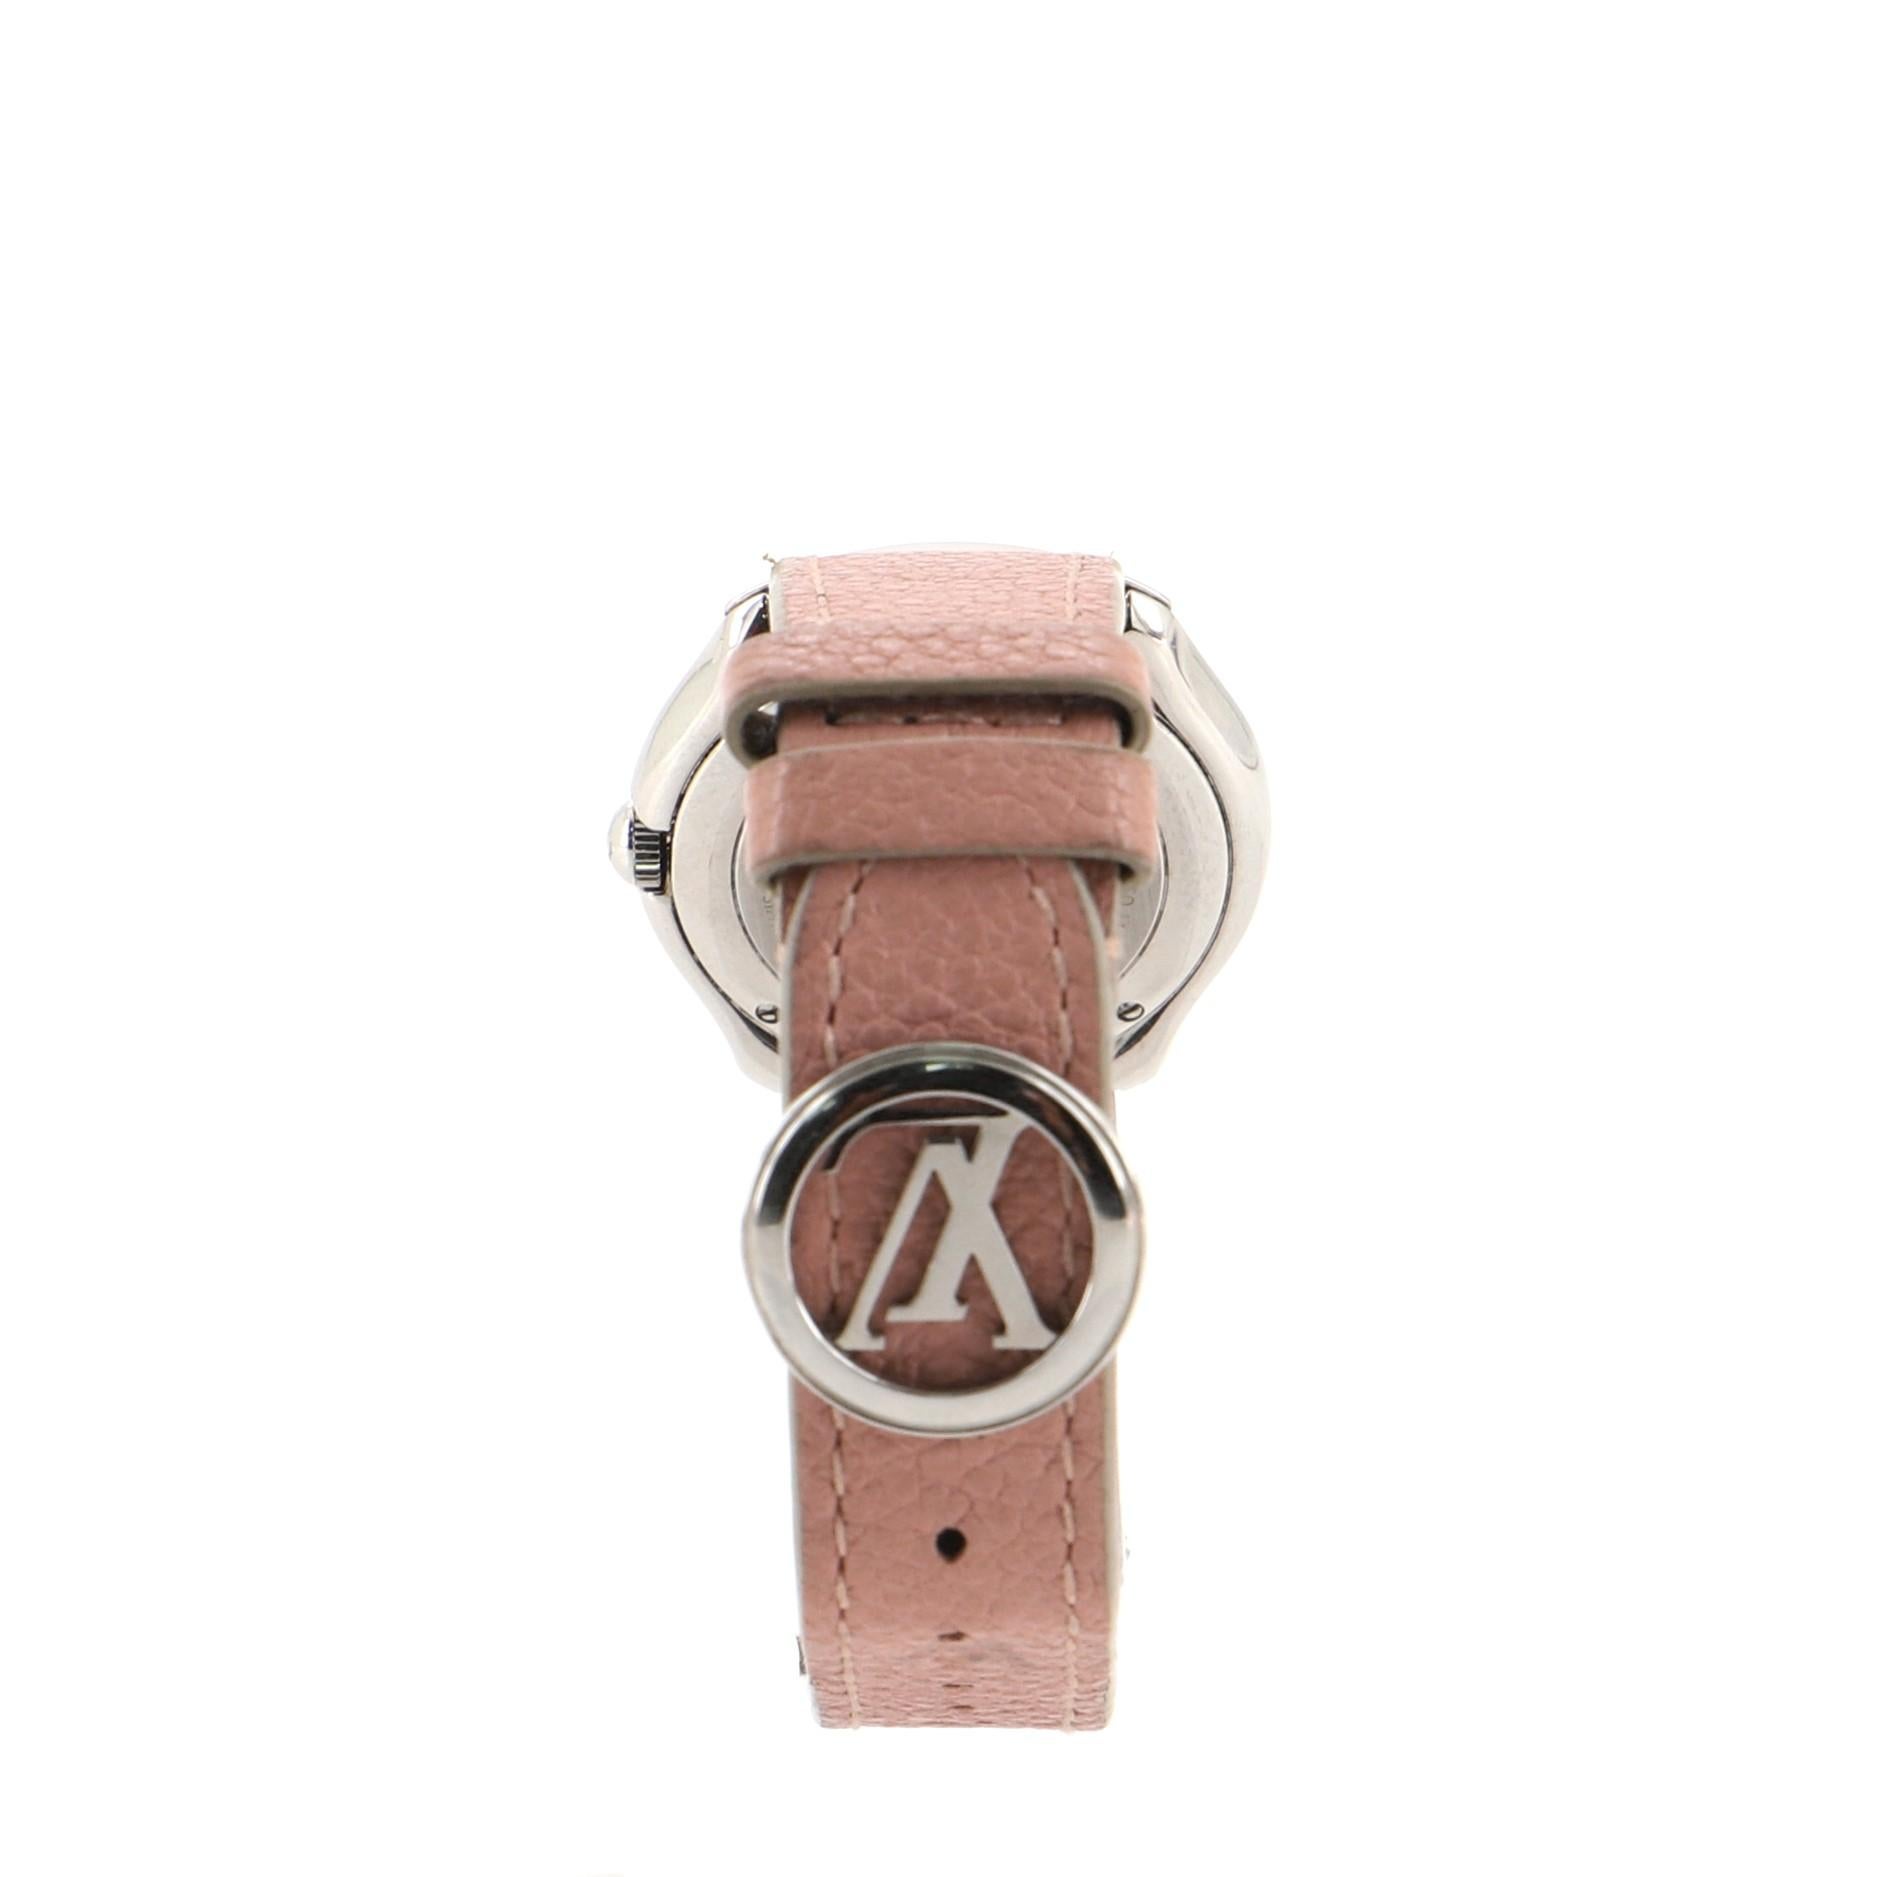 Condition: Fair. Moderate wear, marks and darkening on strap, scratches on hardware.
Accessories: No Accessories
Measurements: Case Size/Width: 31mm, Watch Height: 8mm, Band Width: 16mm, Wrist circumference: 6